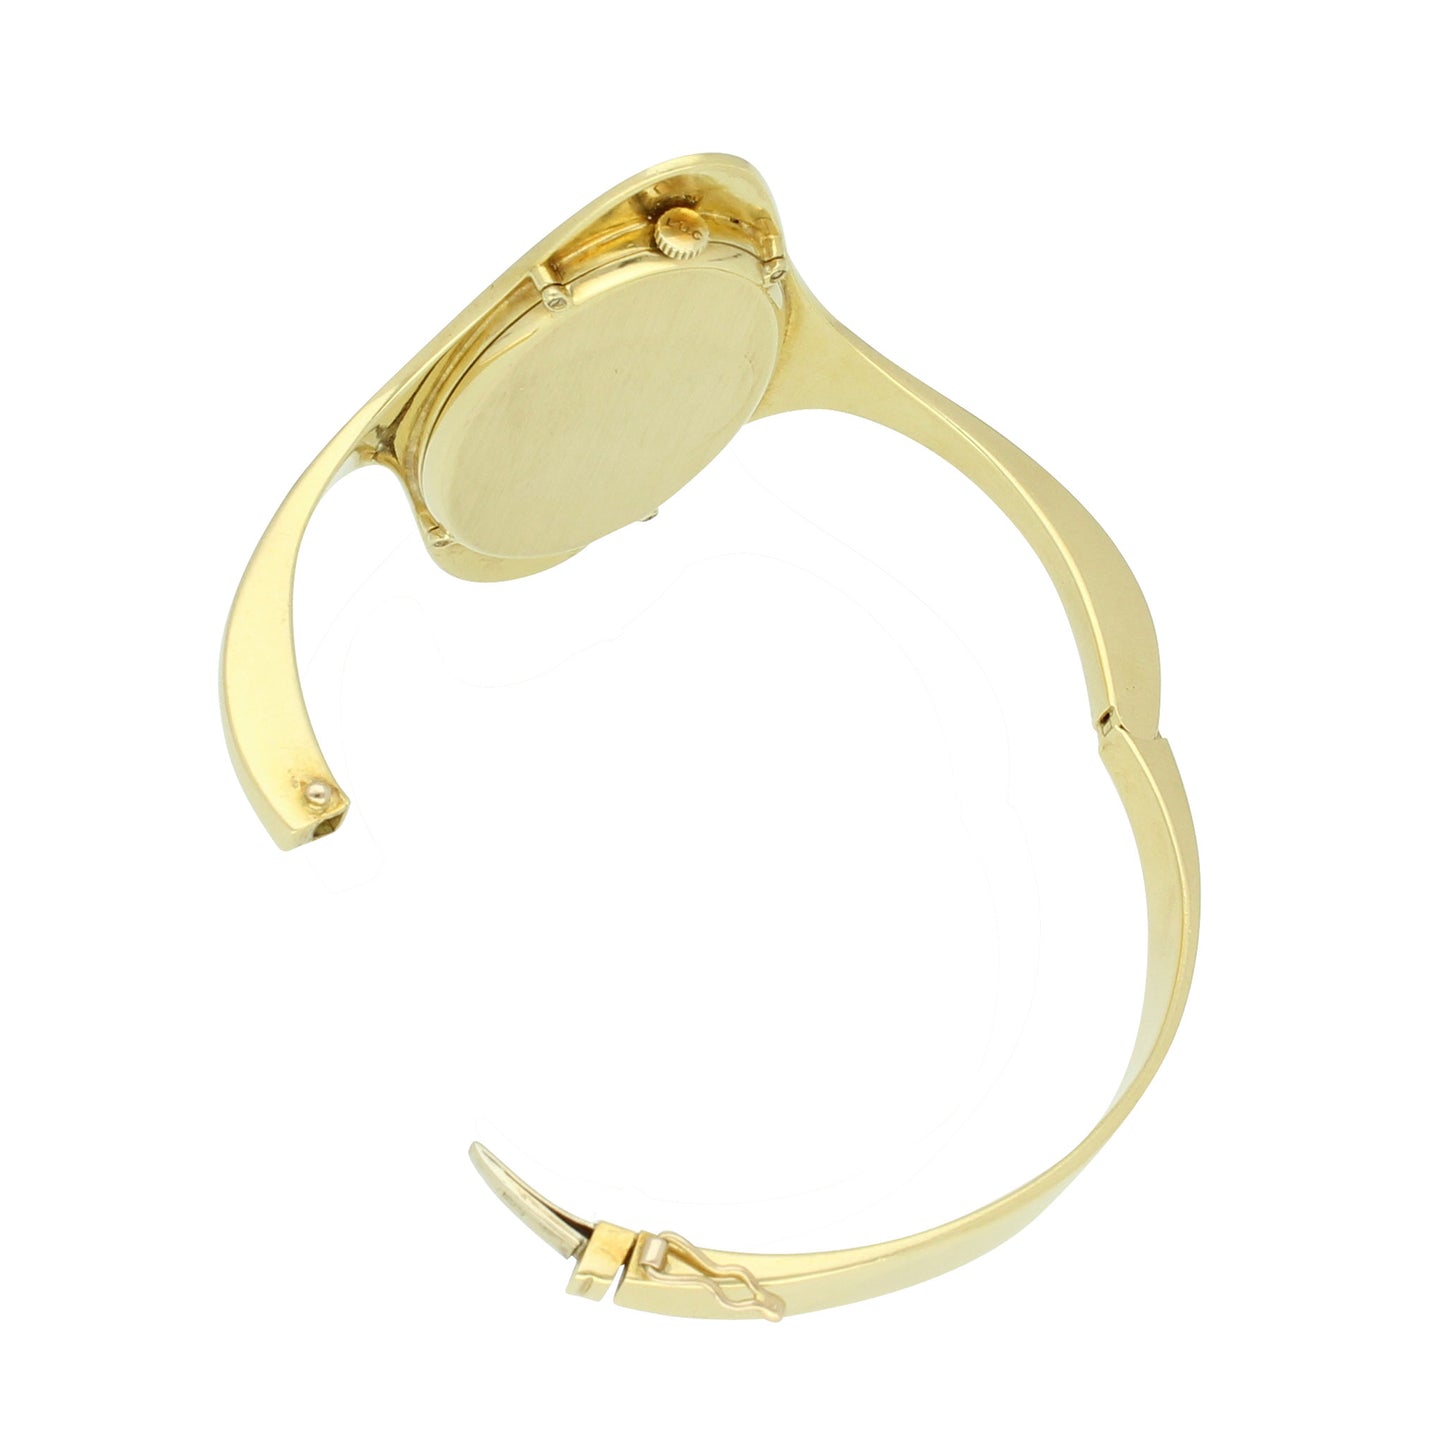 18ct yellow gold bangle watch. Made 1970's